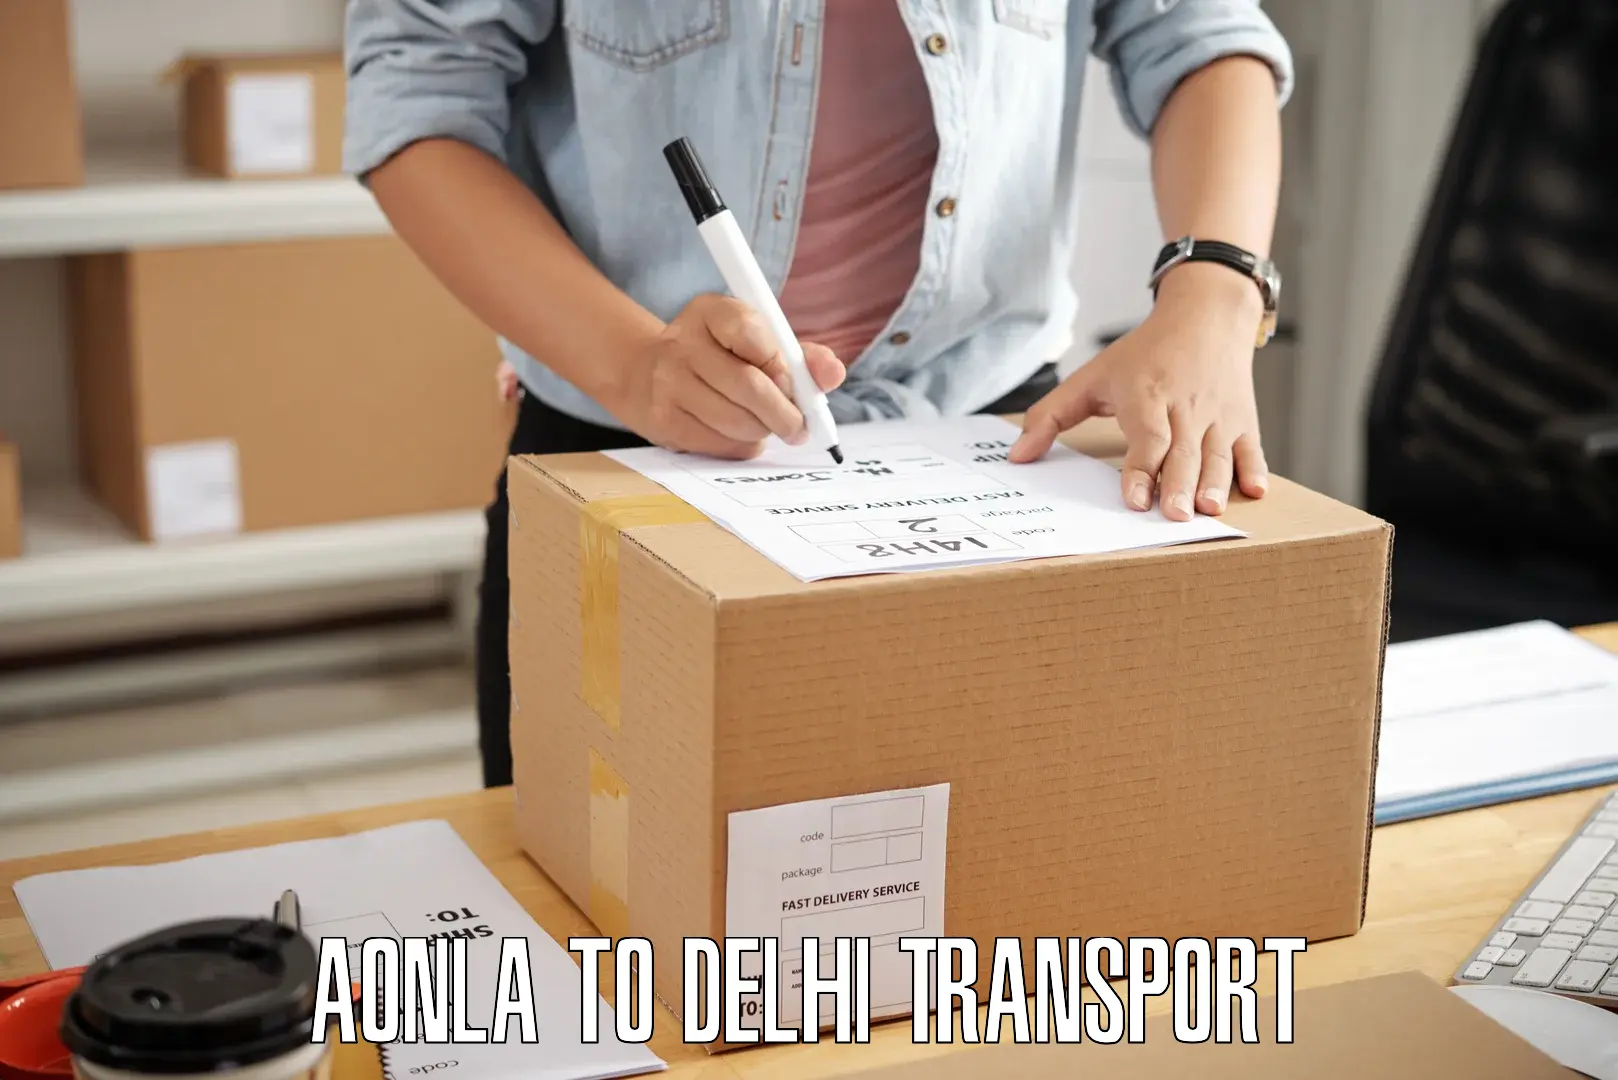 Daily transport service in Aonla to NCR